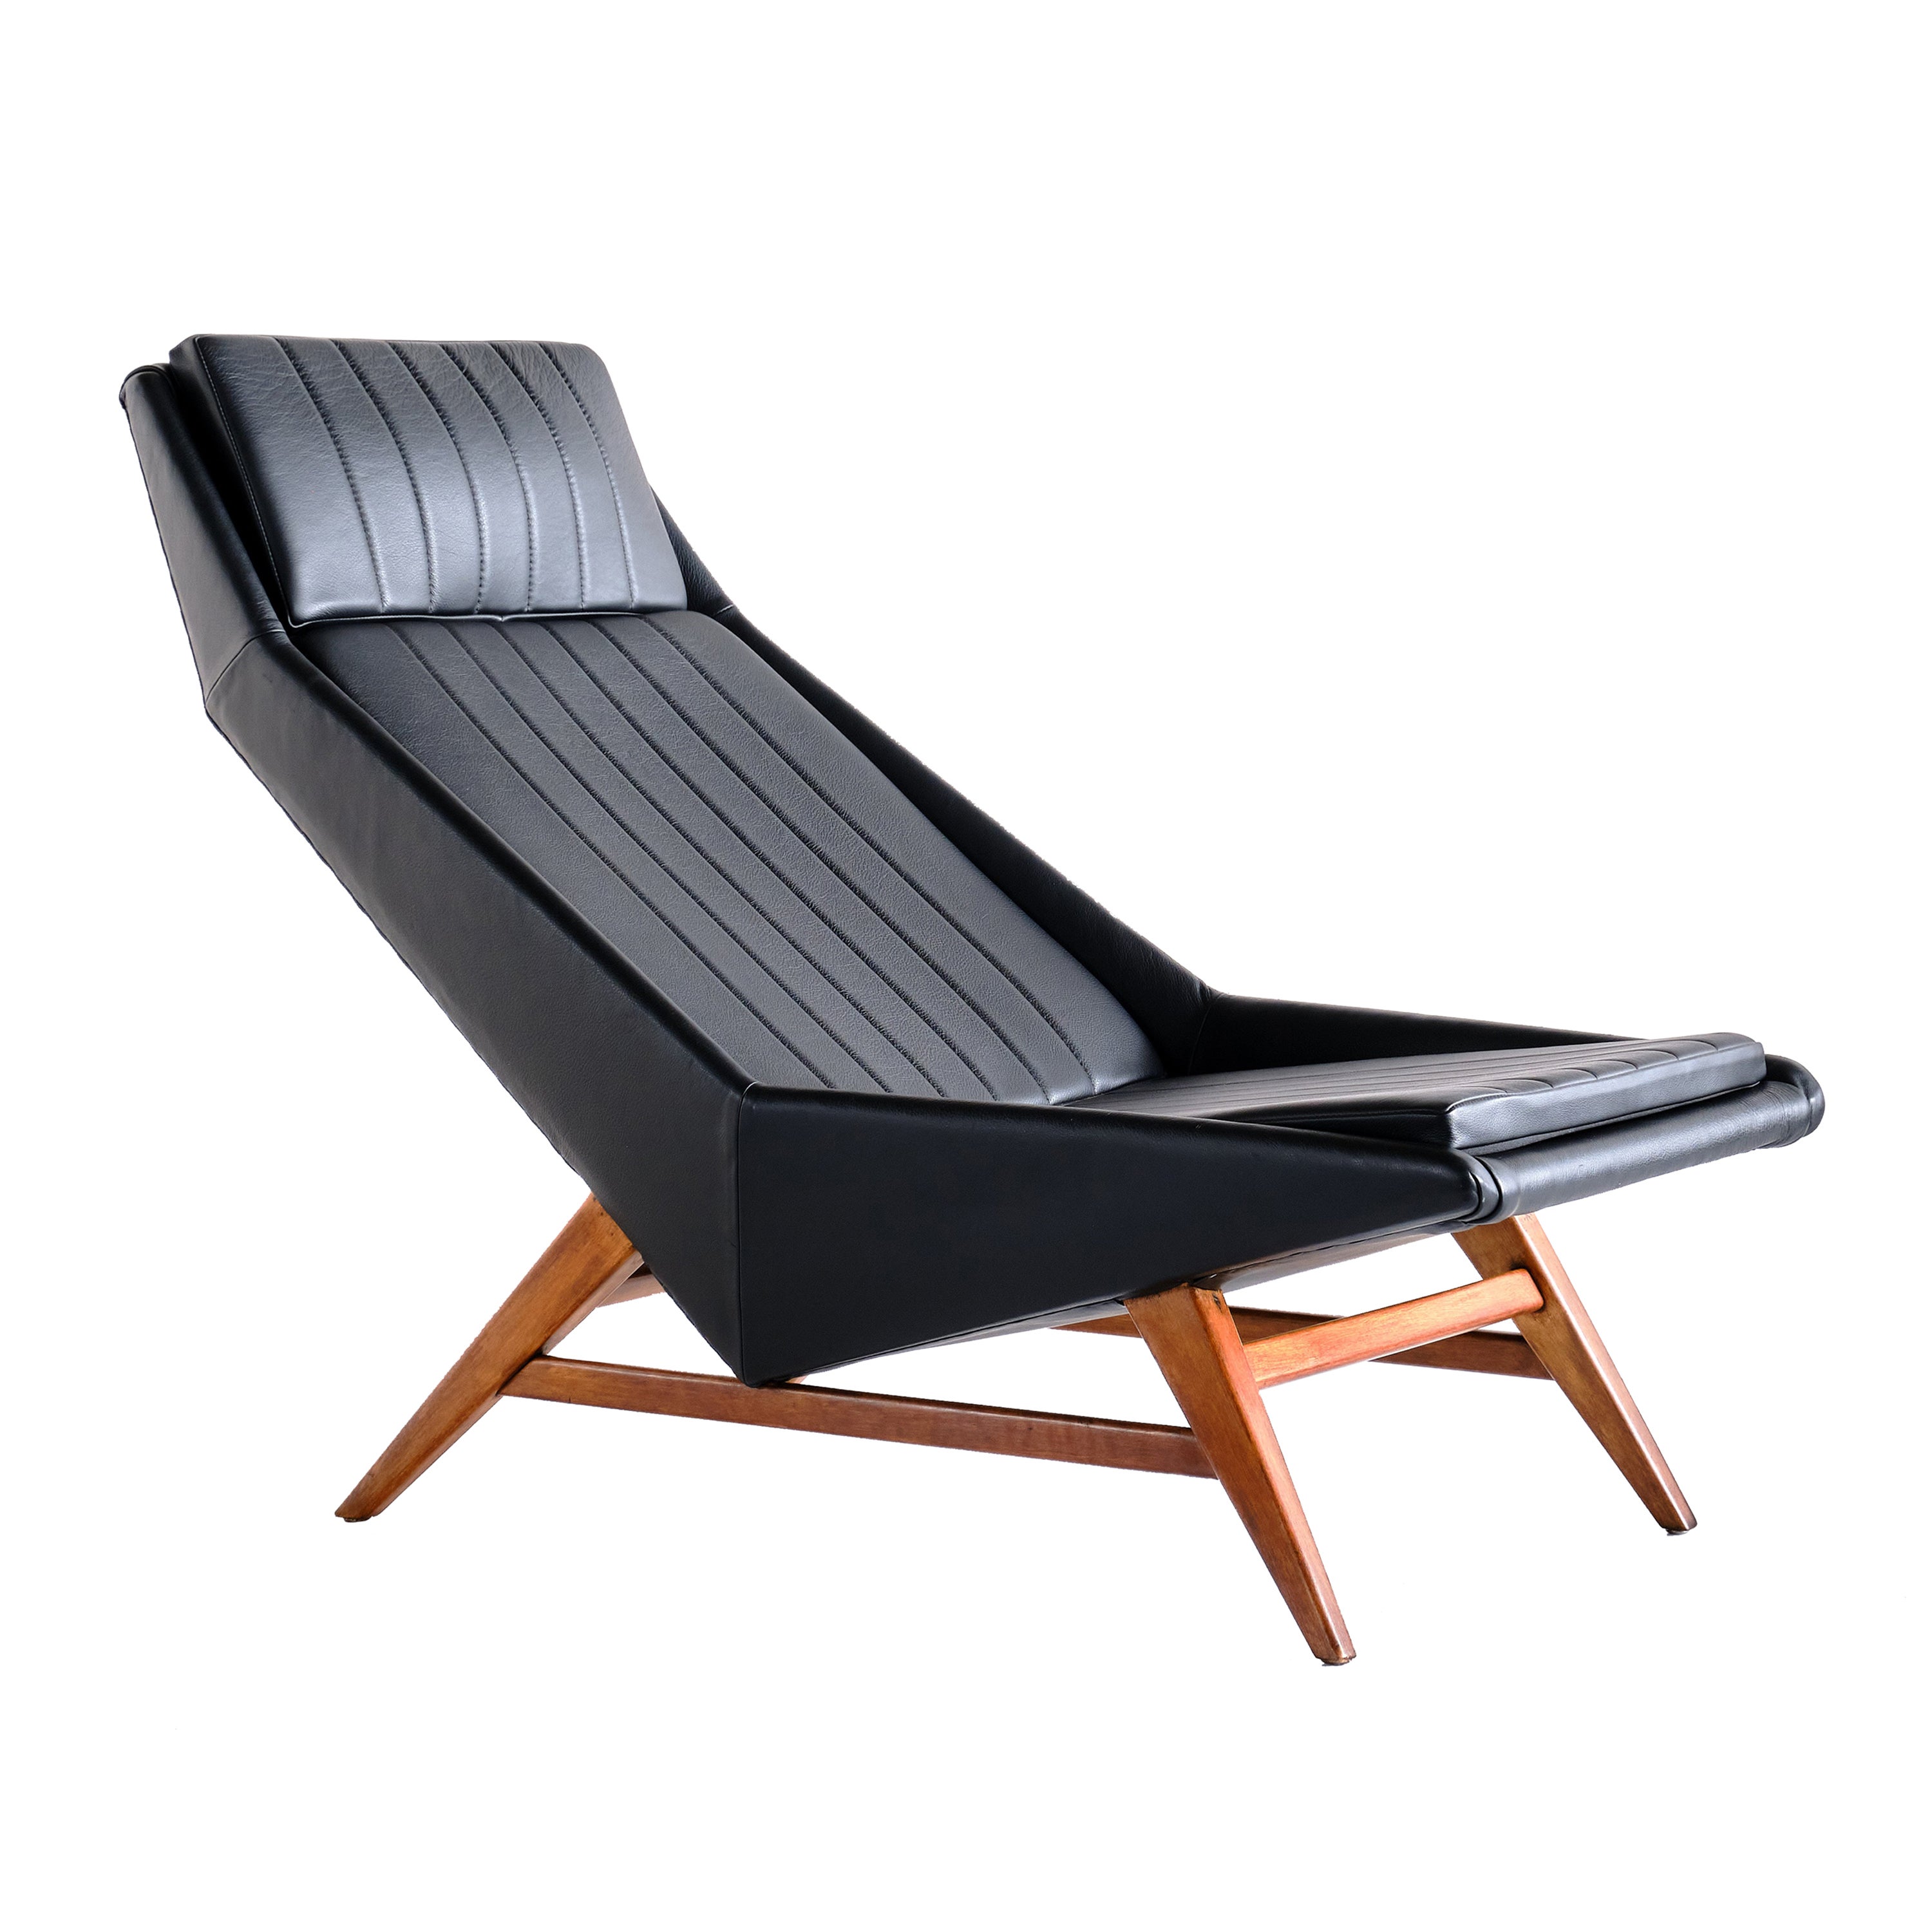 Svante Skogh Lounge Chair in Leather and Beech, AB Hjertquist & Co, Sweden, 1955